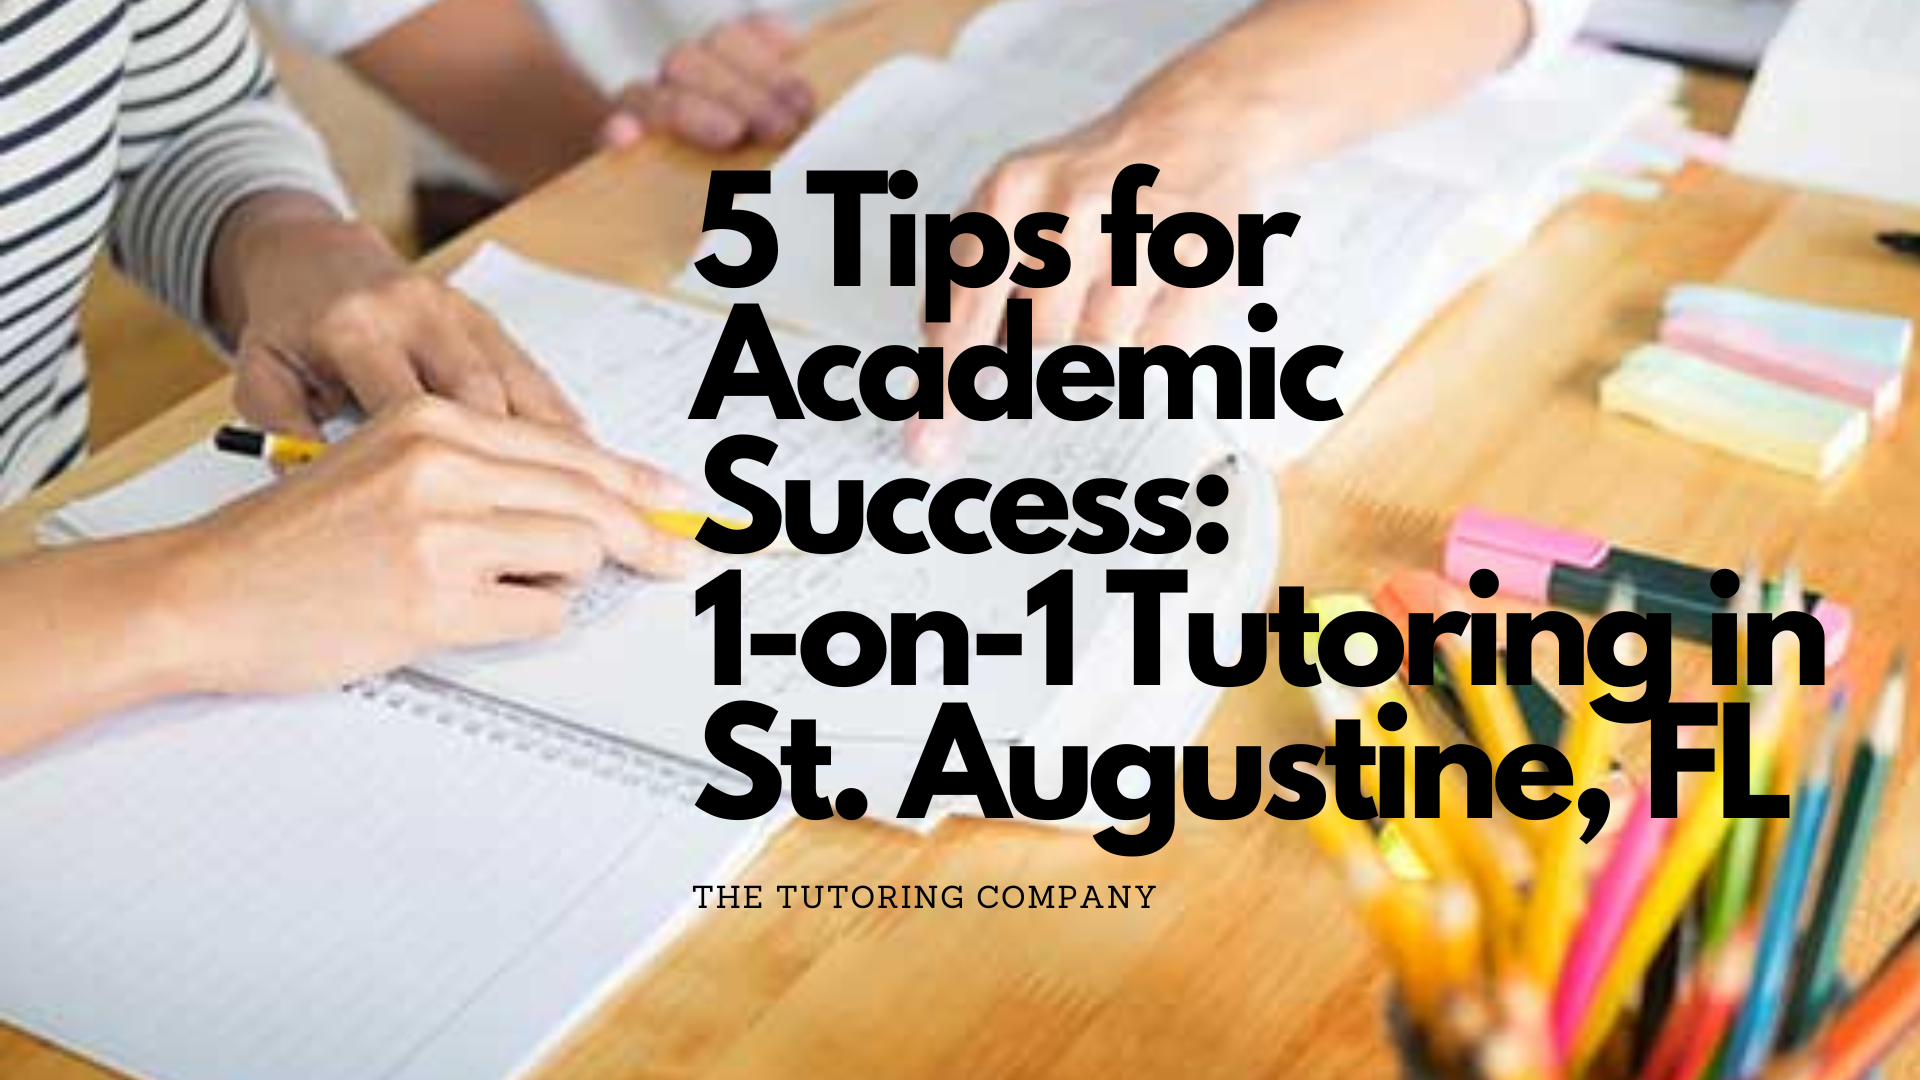 Looking for academic support for your child in St. Augustine, FL? Discover 5 tips for successful one-on-one tutoring and contact The Tutoring Company for personalized tutoring services.